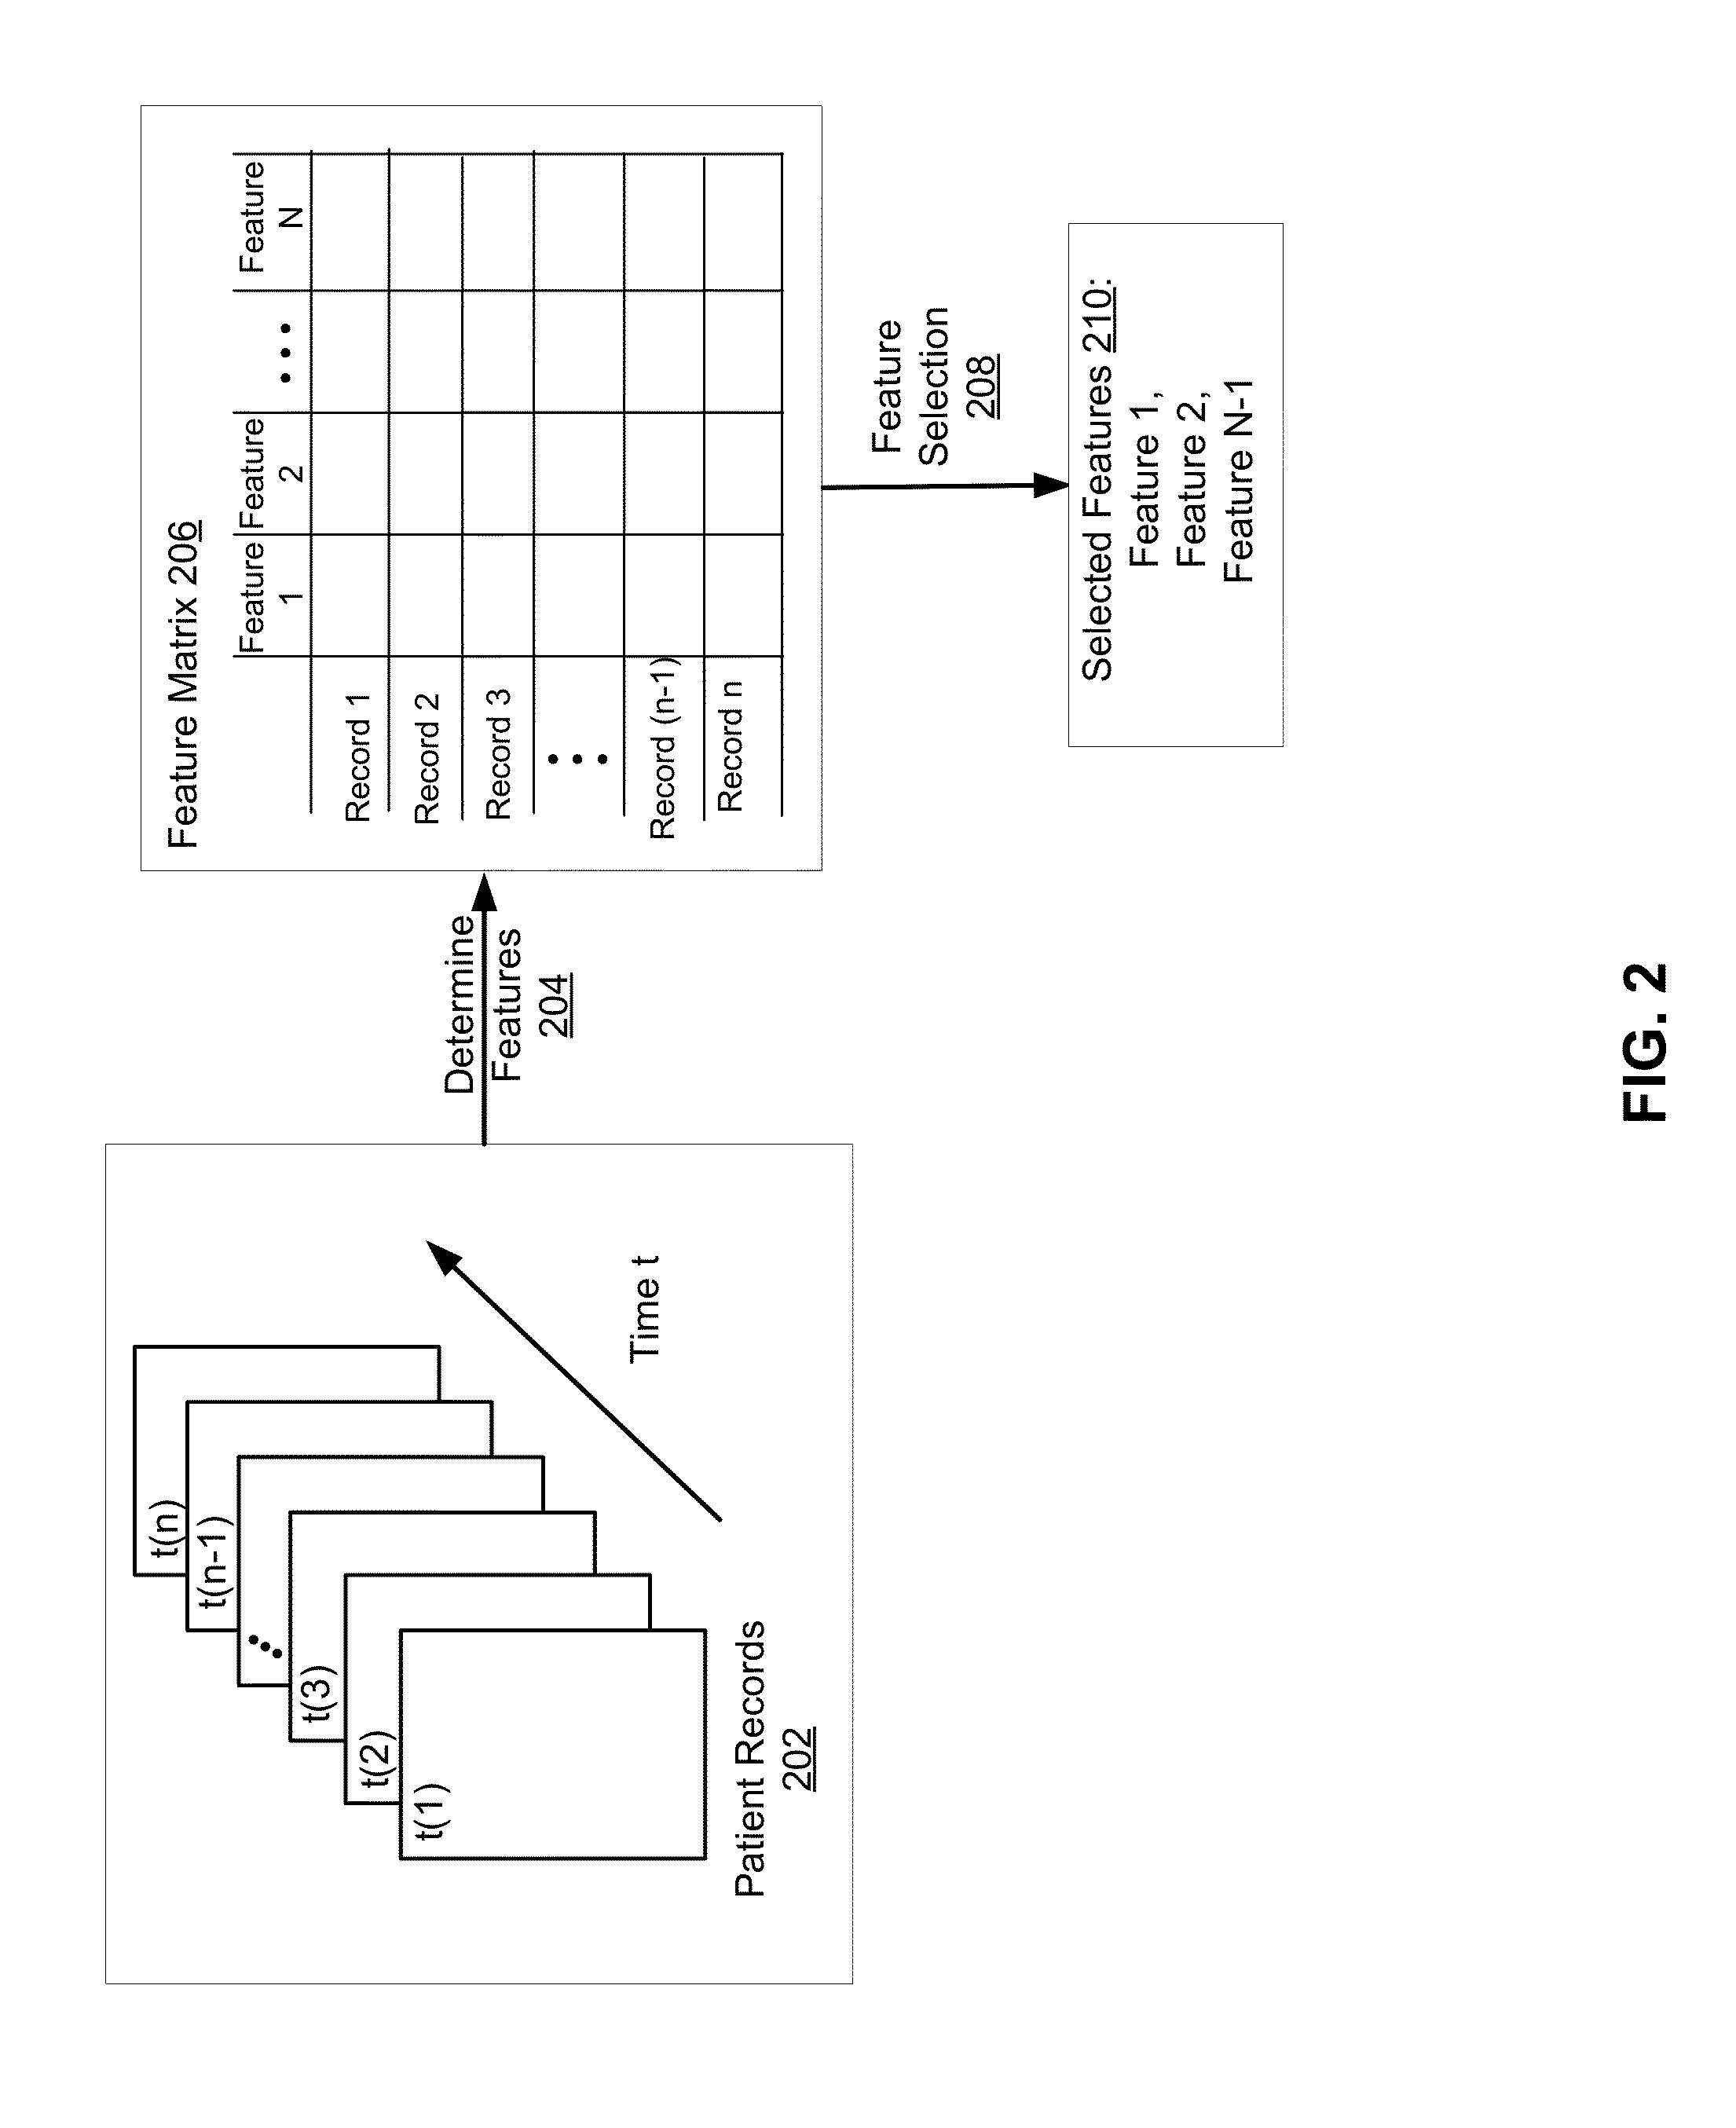 System for Generating and Updating Treatment Guidelines and Estimating Effect Size of Treatment Steps